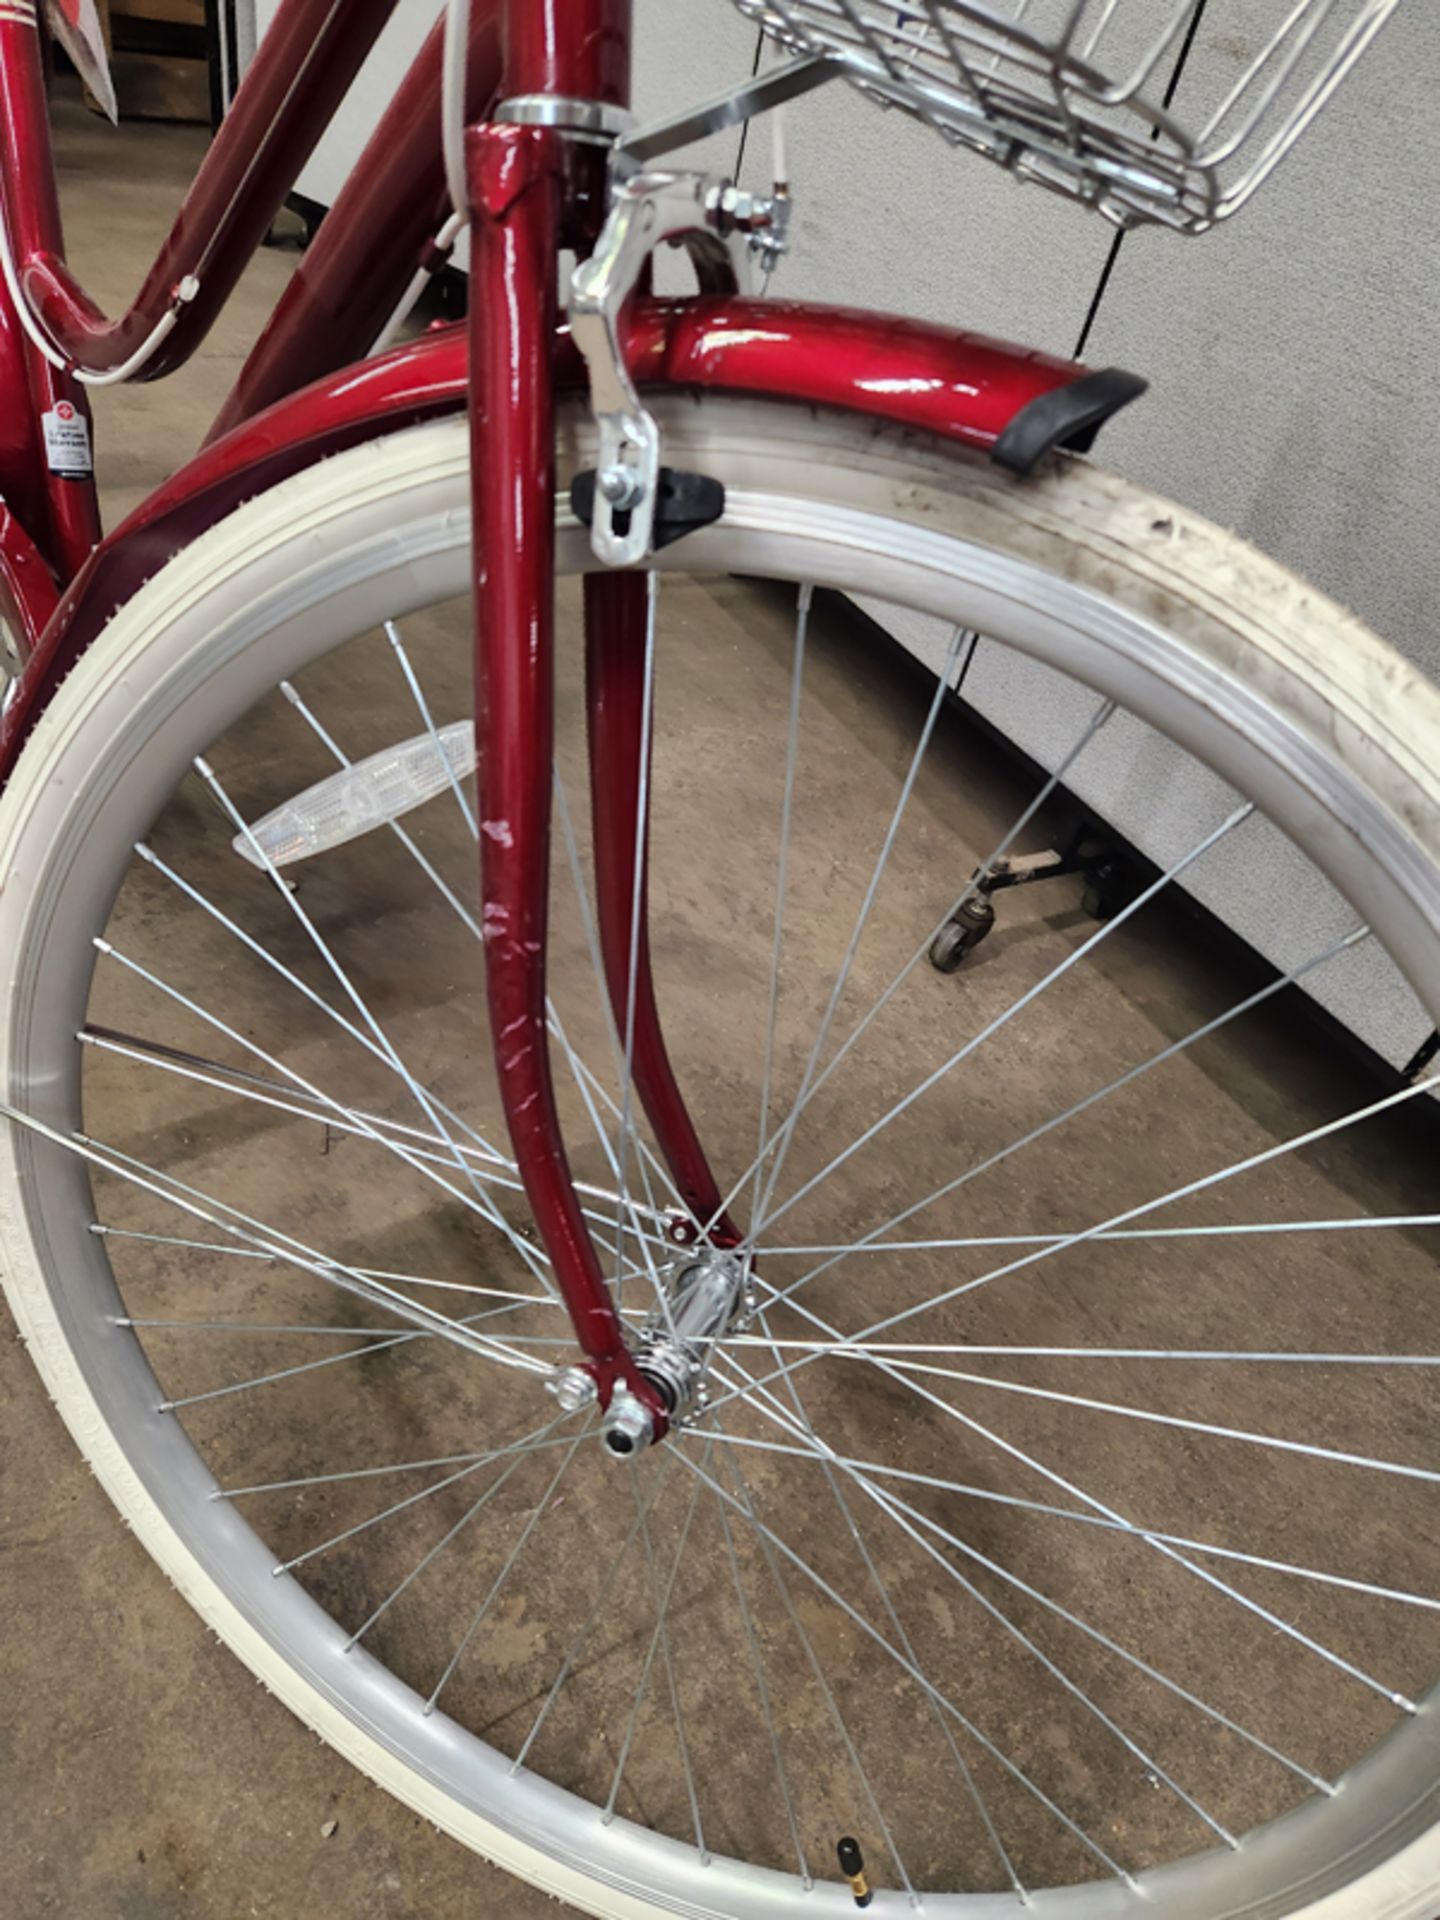 SCHWINN AMHERST BICYCLE MODEL: S5741AC - SCRATCH AND DENT - BENT REAR FENDER - Image 9 of 13